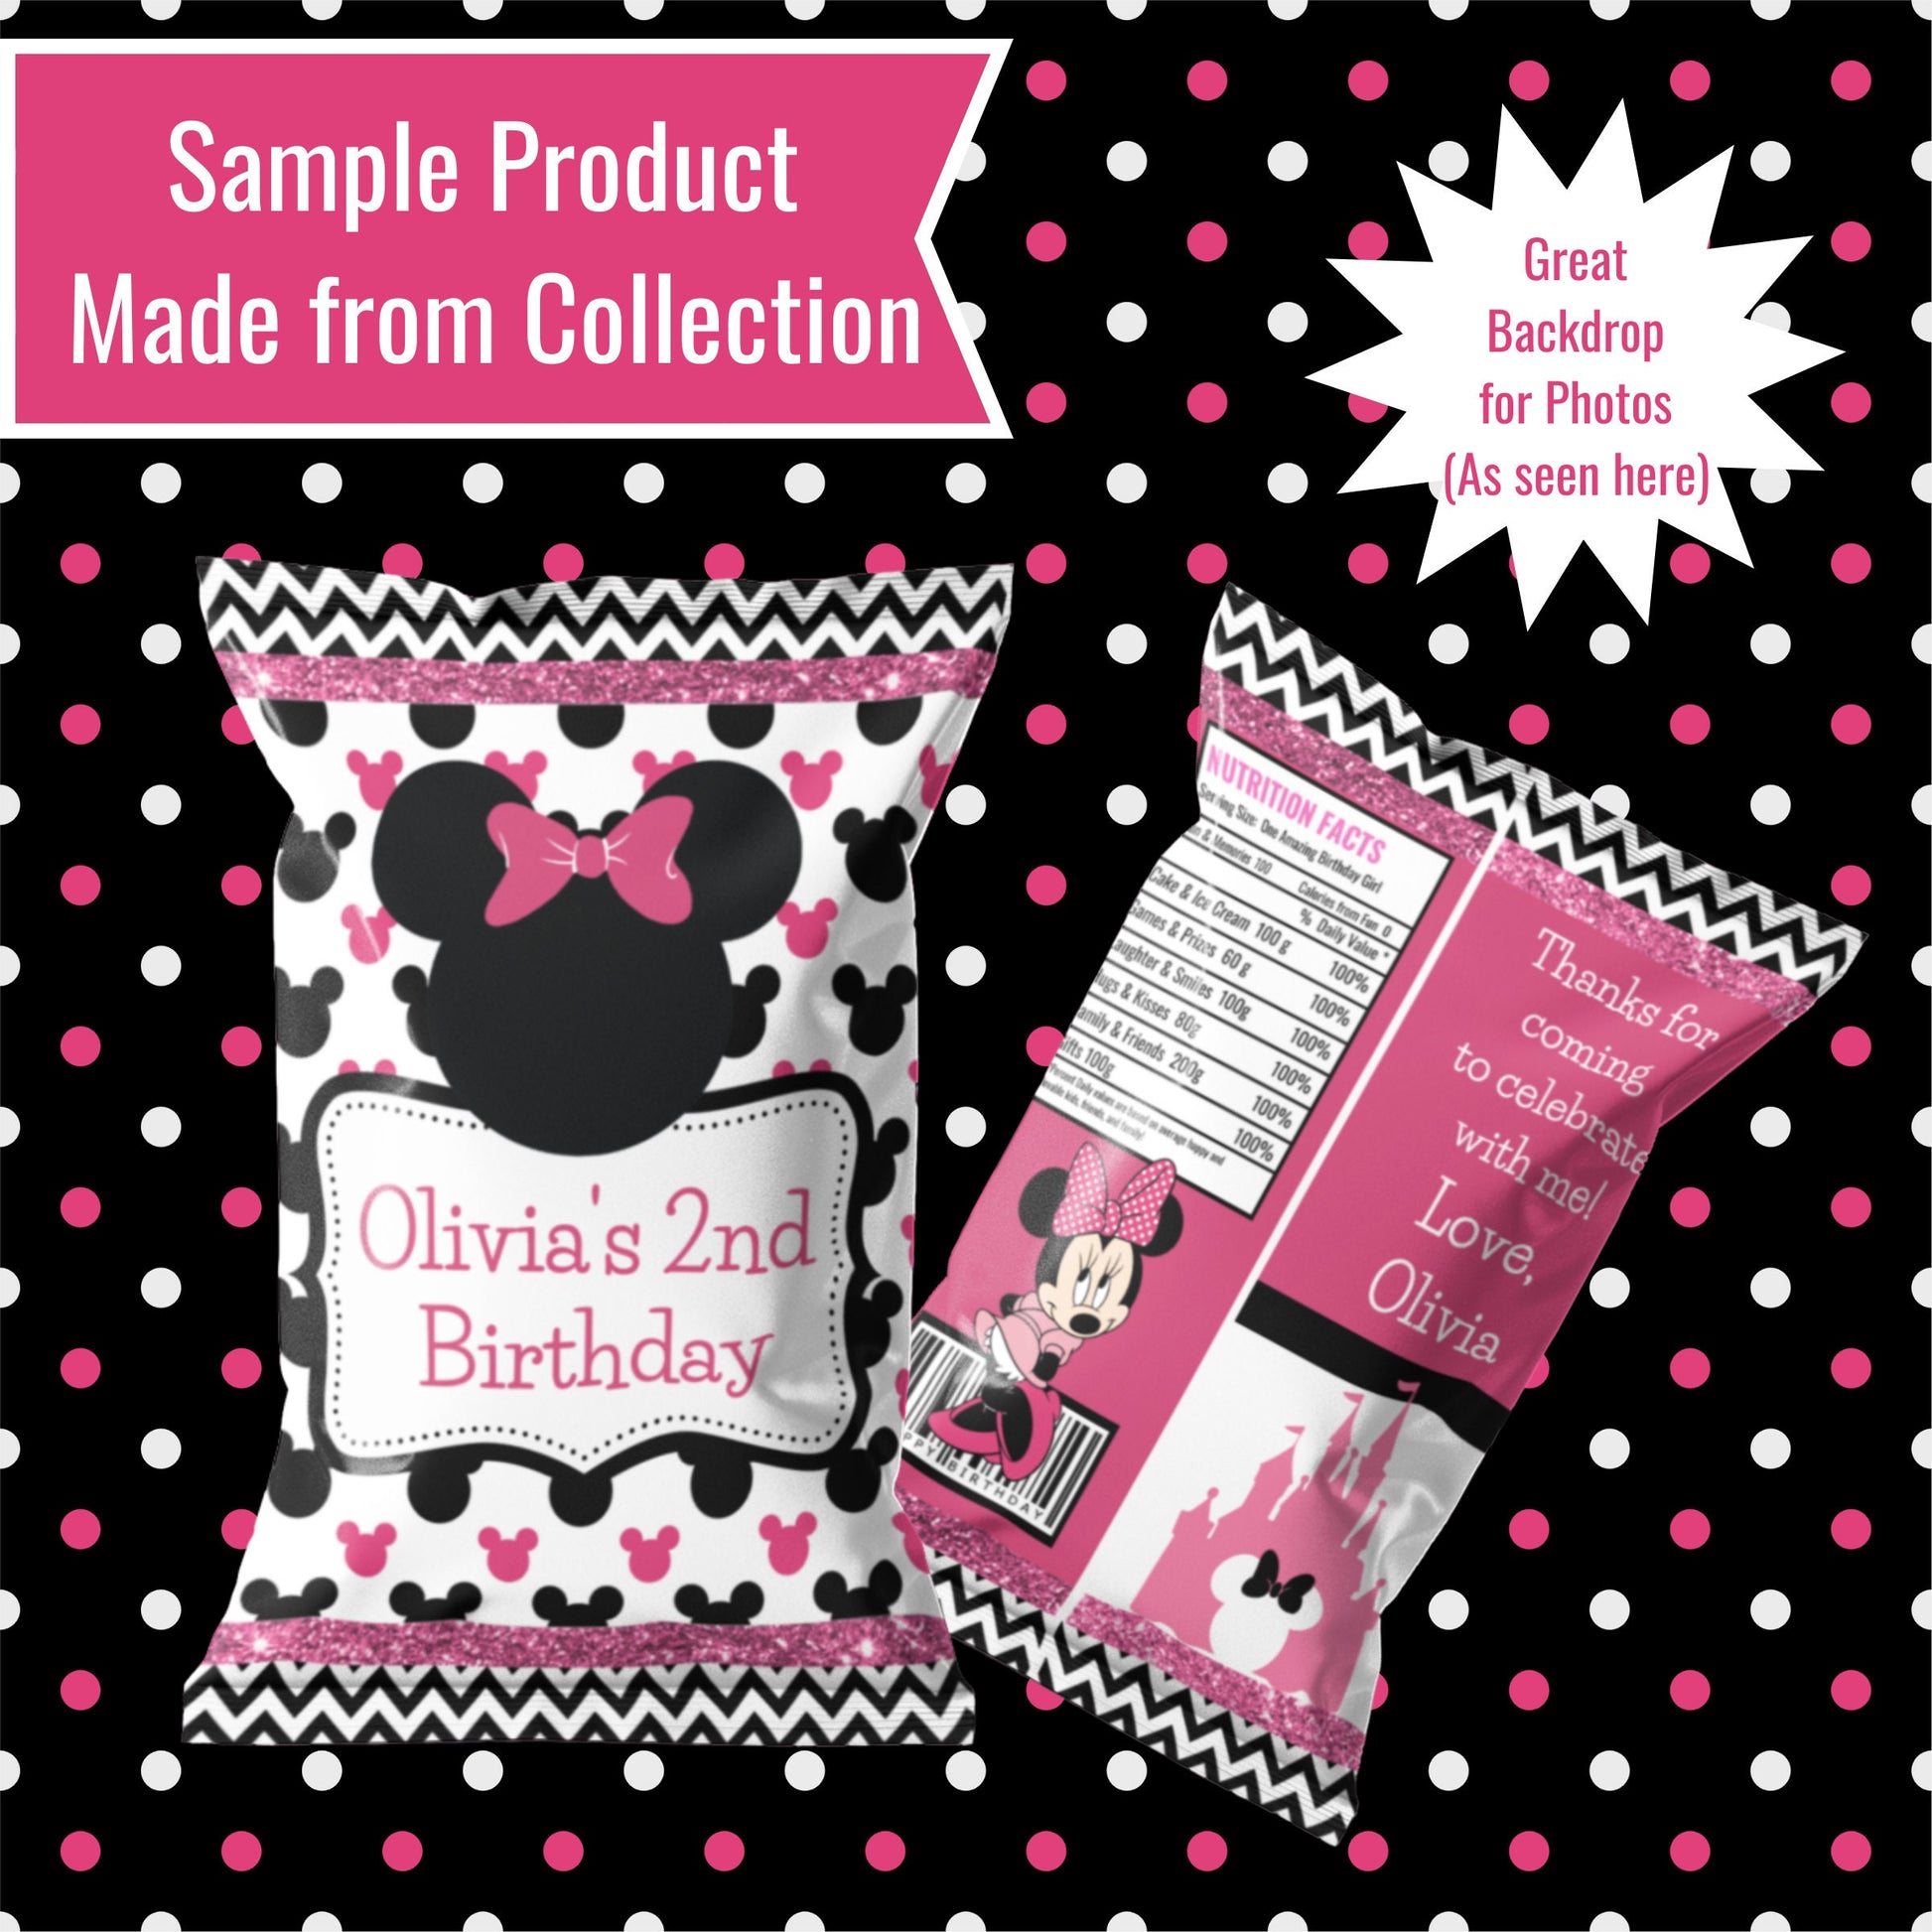 Minnie Mouse Pink digital paper FREE Clip art, scrapbook papers, wallpaper, Minnie background, polka dots, Pink Black digital papers - SthrngurlCreations